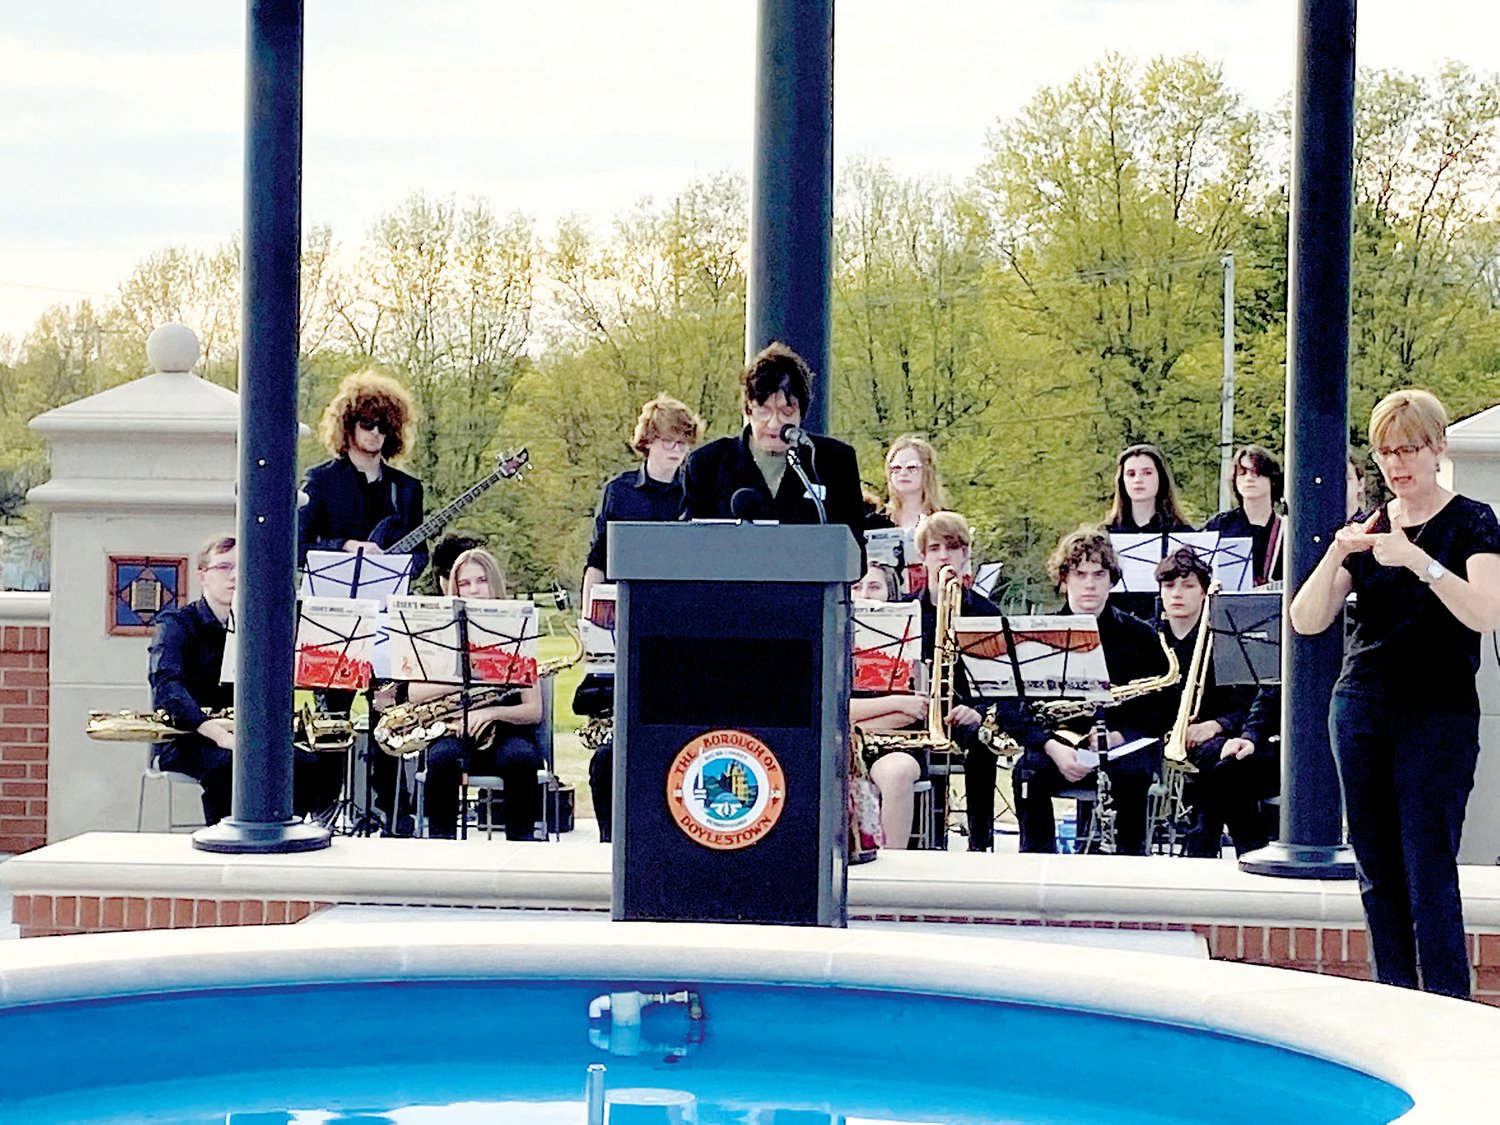 On May 5, Doylestown Borough Mayor Noni West welcomed residents and local officials to the long-awaited opening of Broad Commons Park.